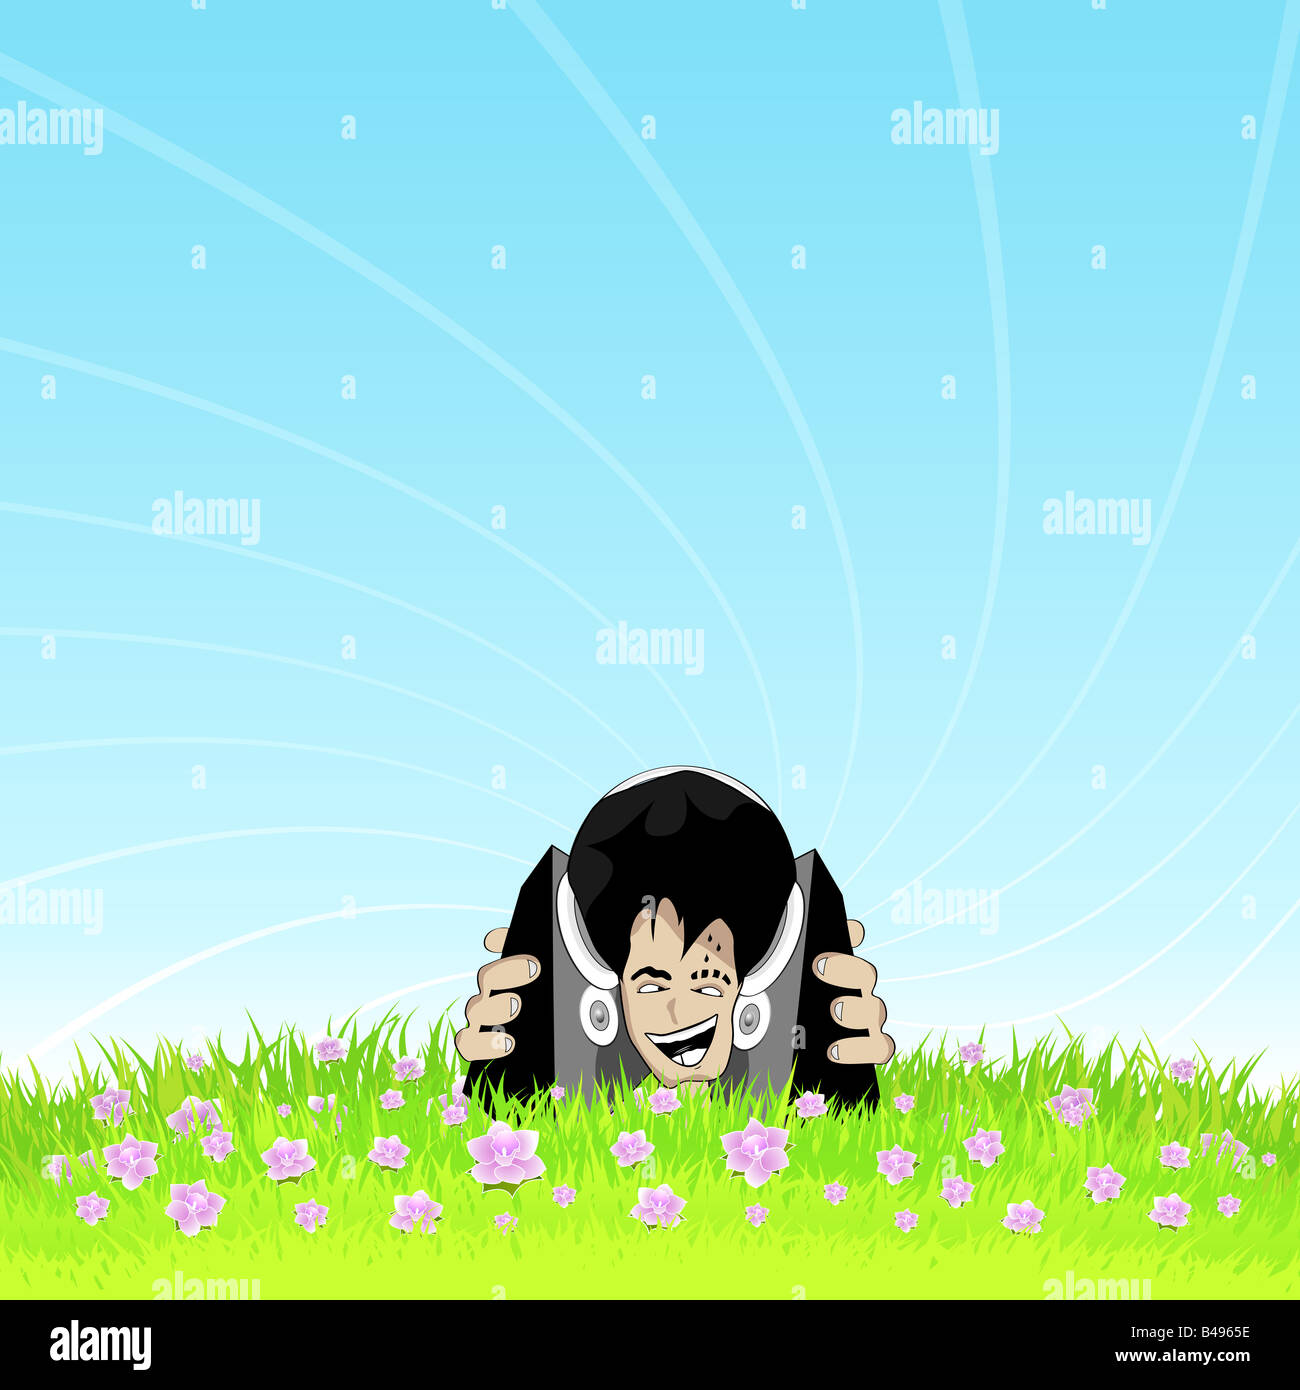 Vector illustration of a smiling deejay young boy listening to music in a beautiful pink flowers meadow Stock Photo